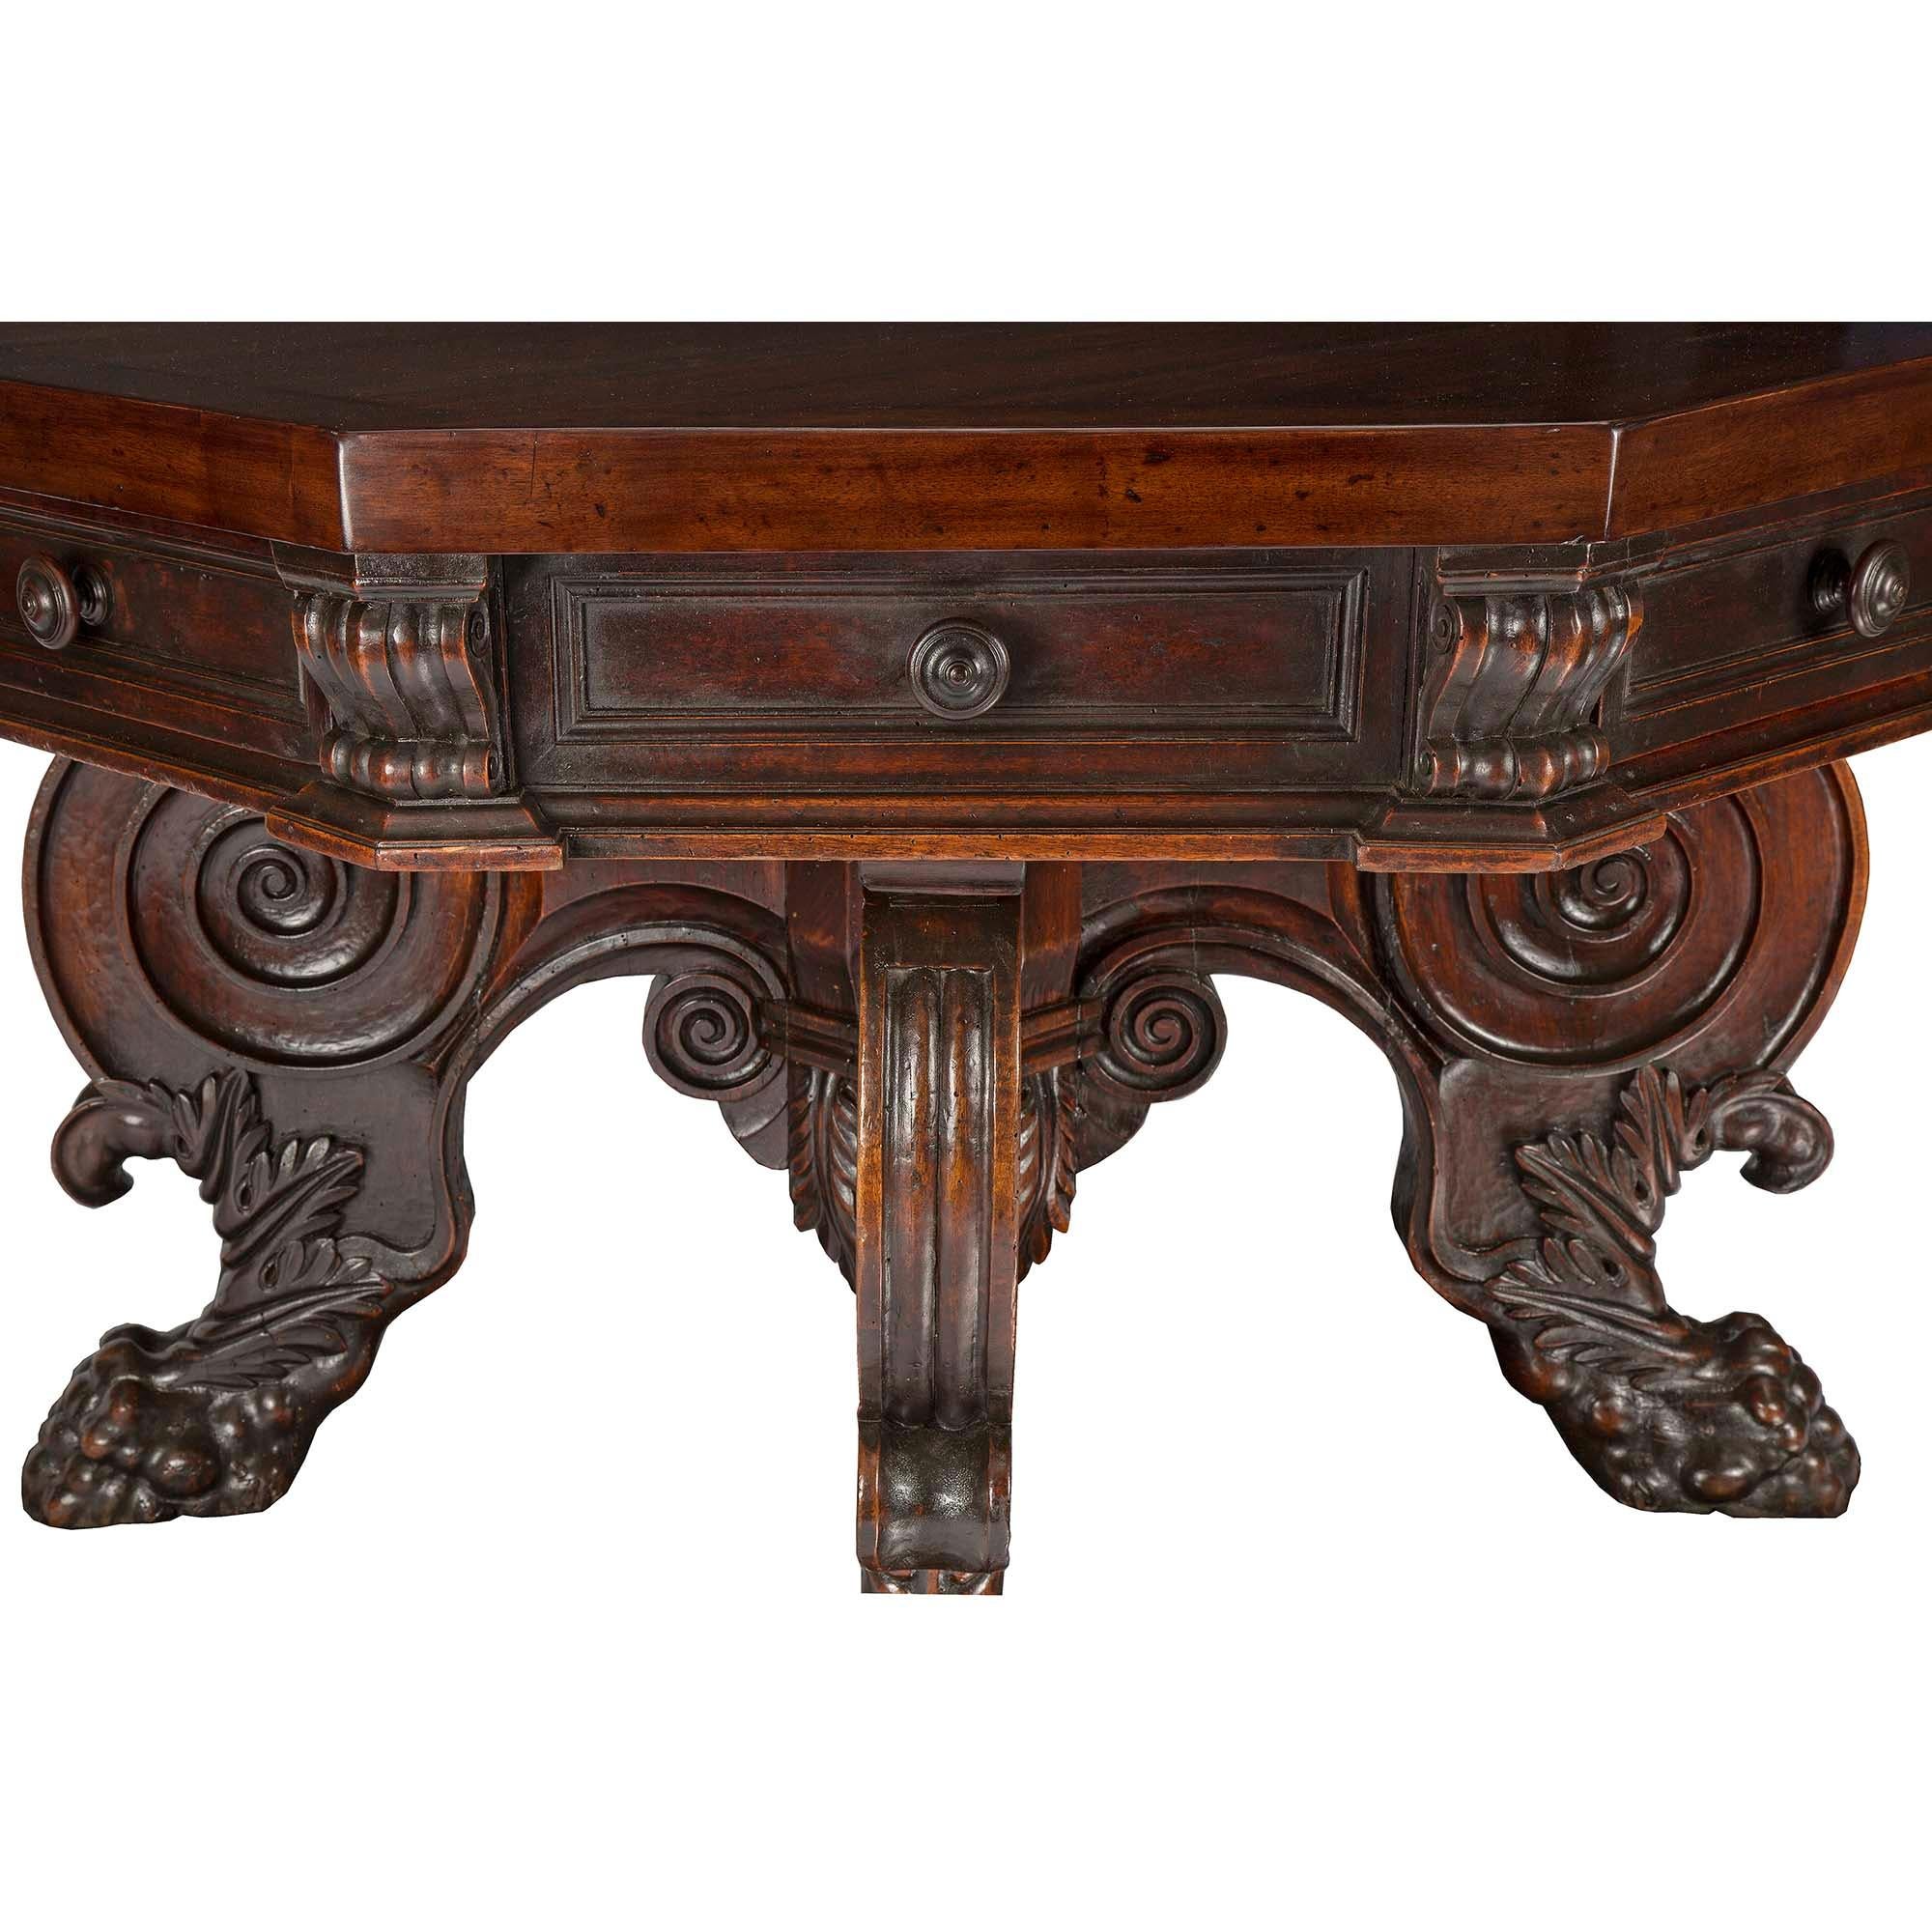 Italian 17th Century Baroque Period Solid Walnut Octagonal Center Table For Sale 3